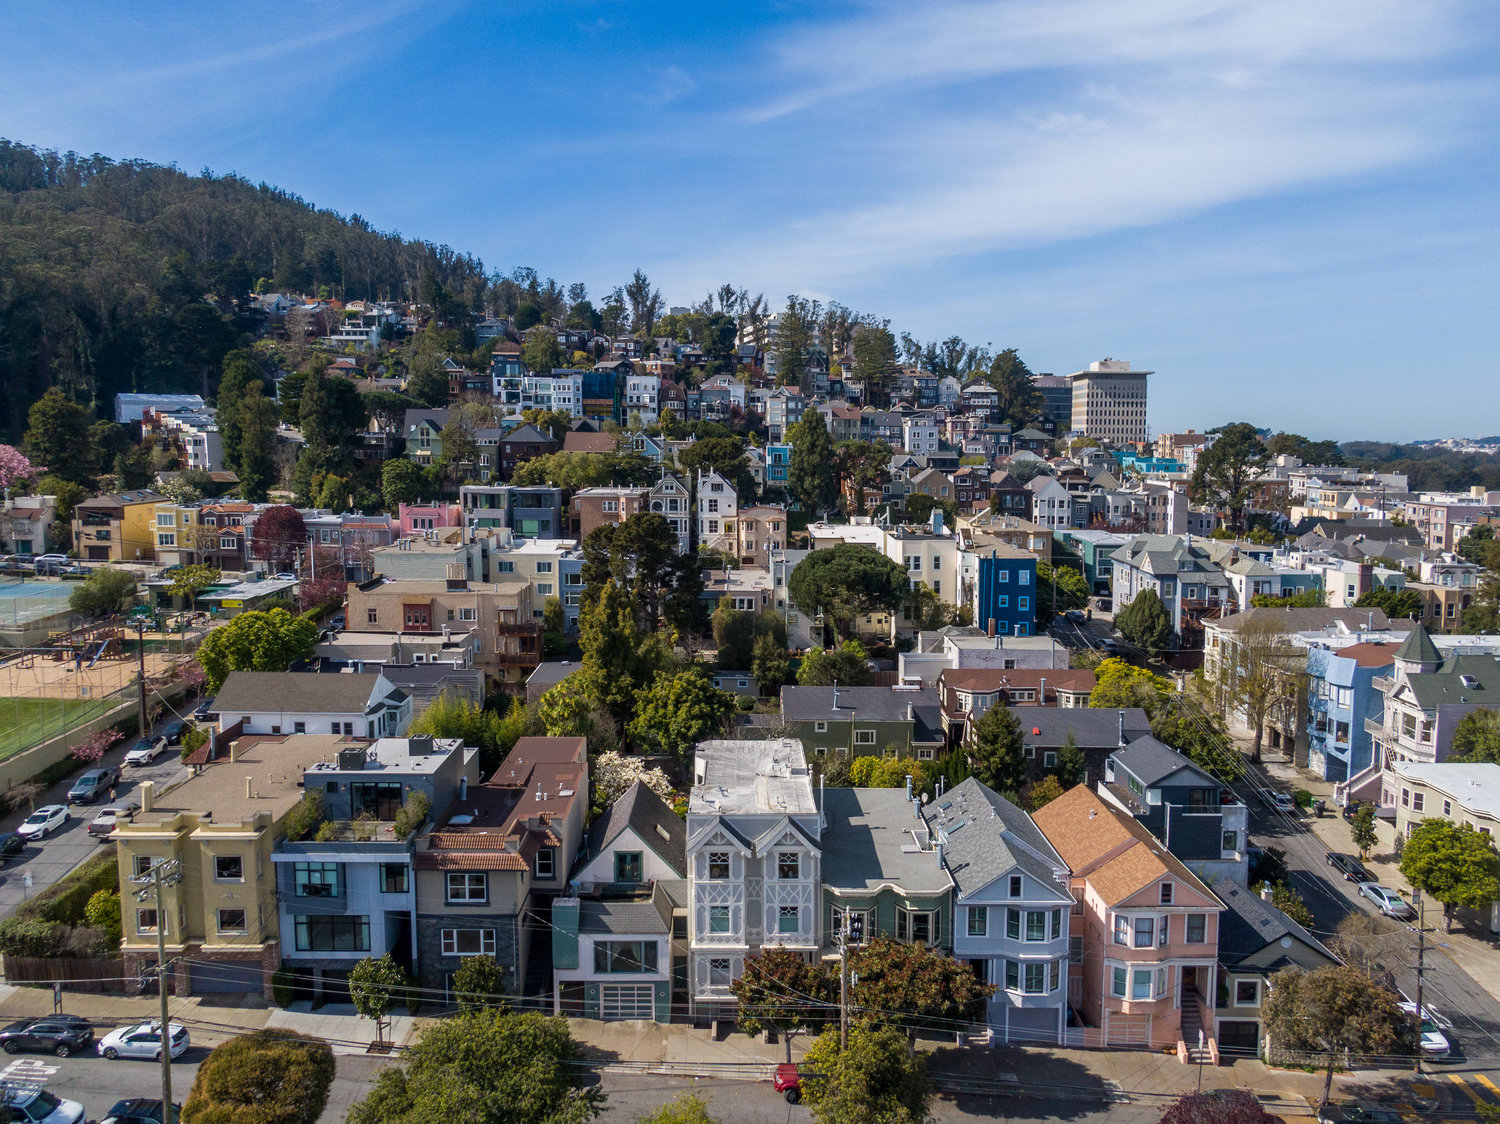 Property Photo: Aerial view of 1223 Shrader Street, showing Cole Valley and San Francisco beyond